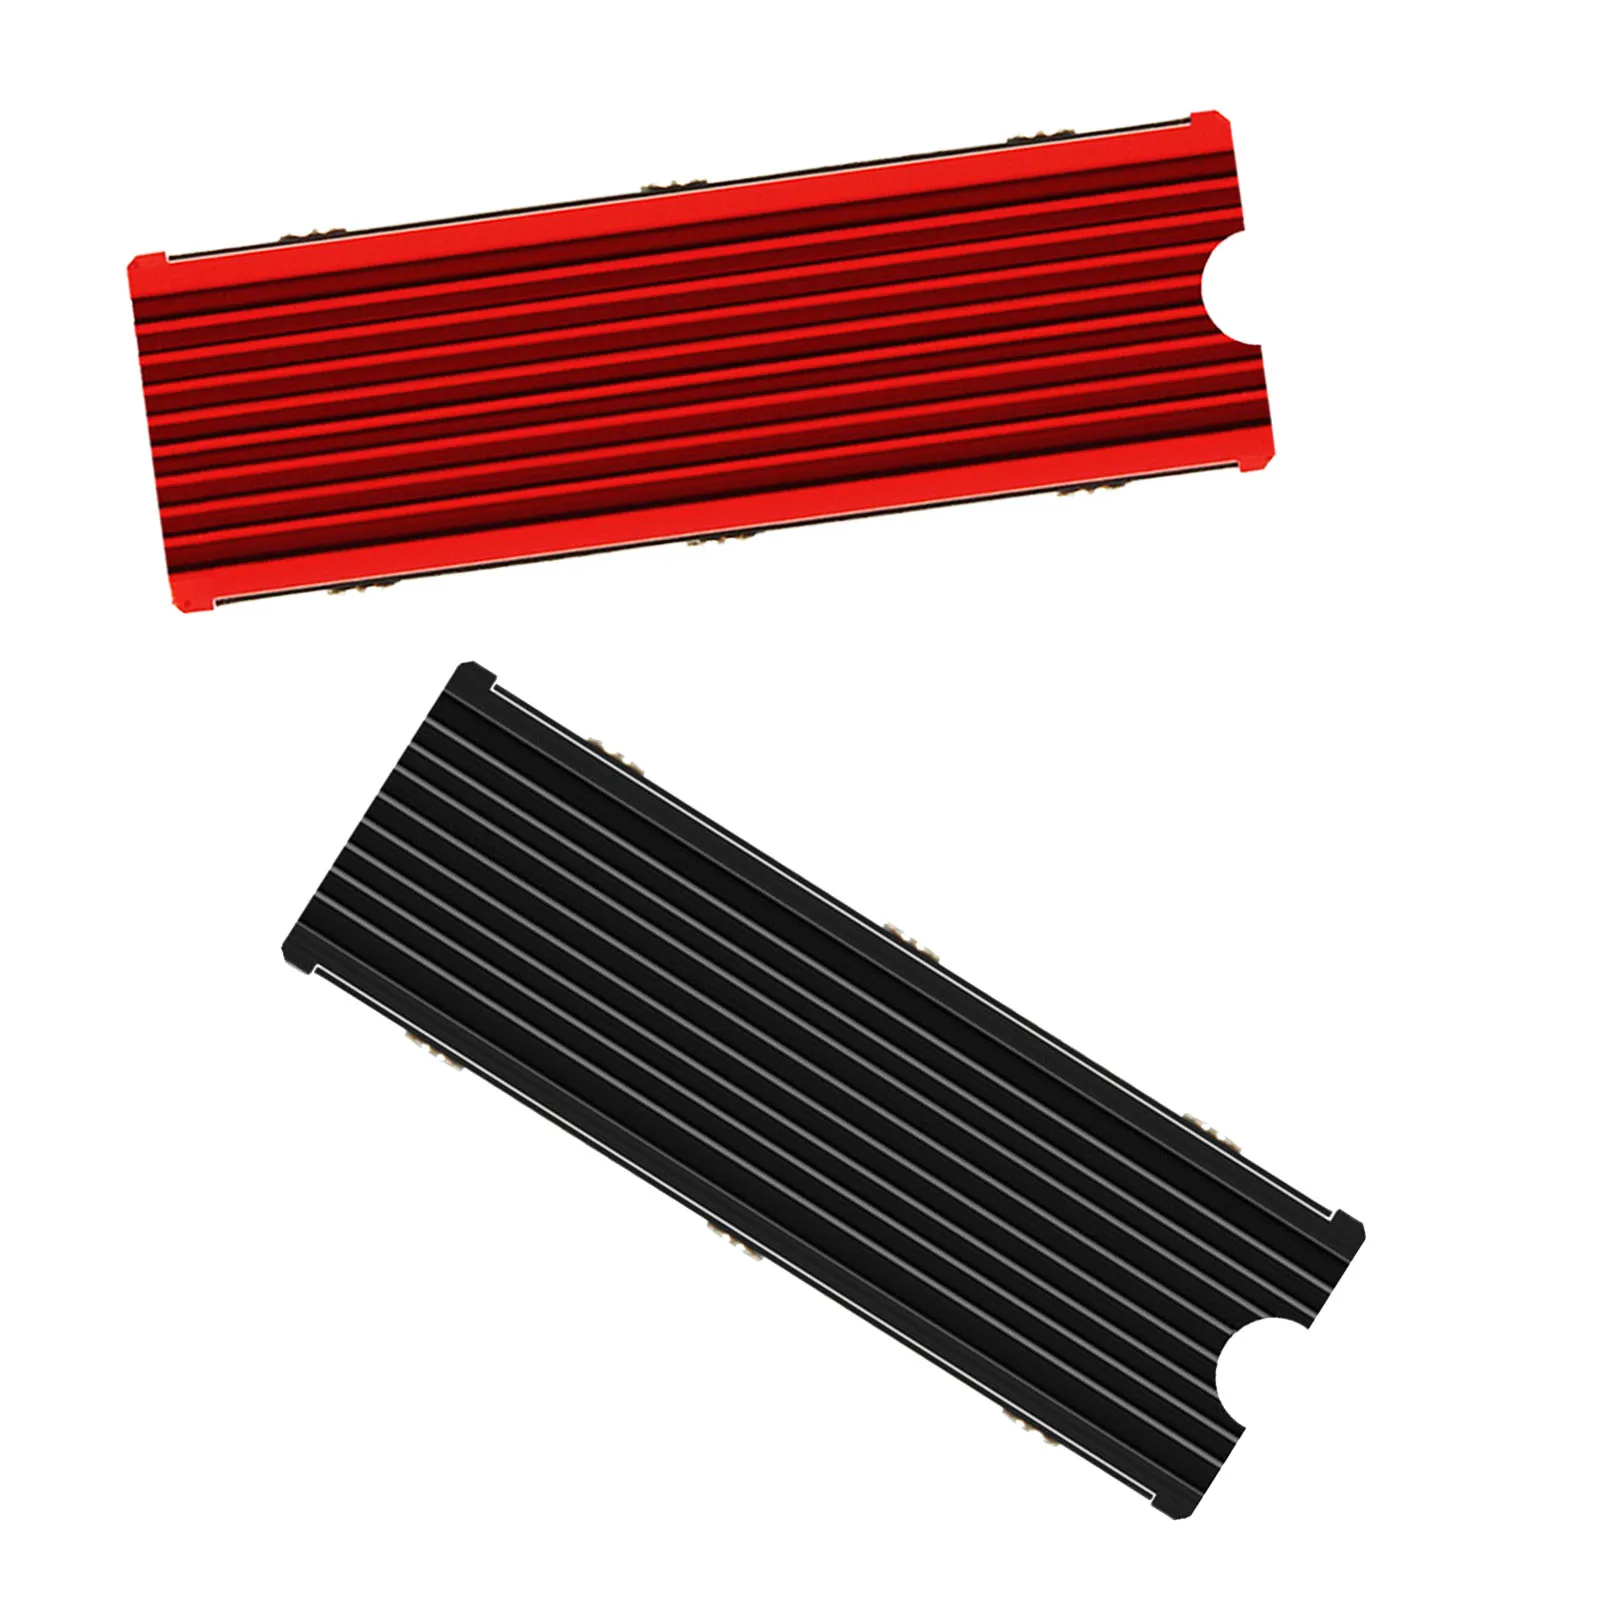 

WARSHIP M.2 NGFF PCIE NVMe 2280 SSD Heatsink Cooling Fin Radiator + Thermal Pads For M.2 SSD Black red